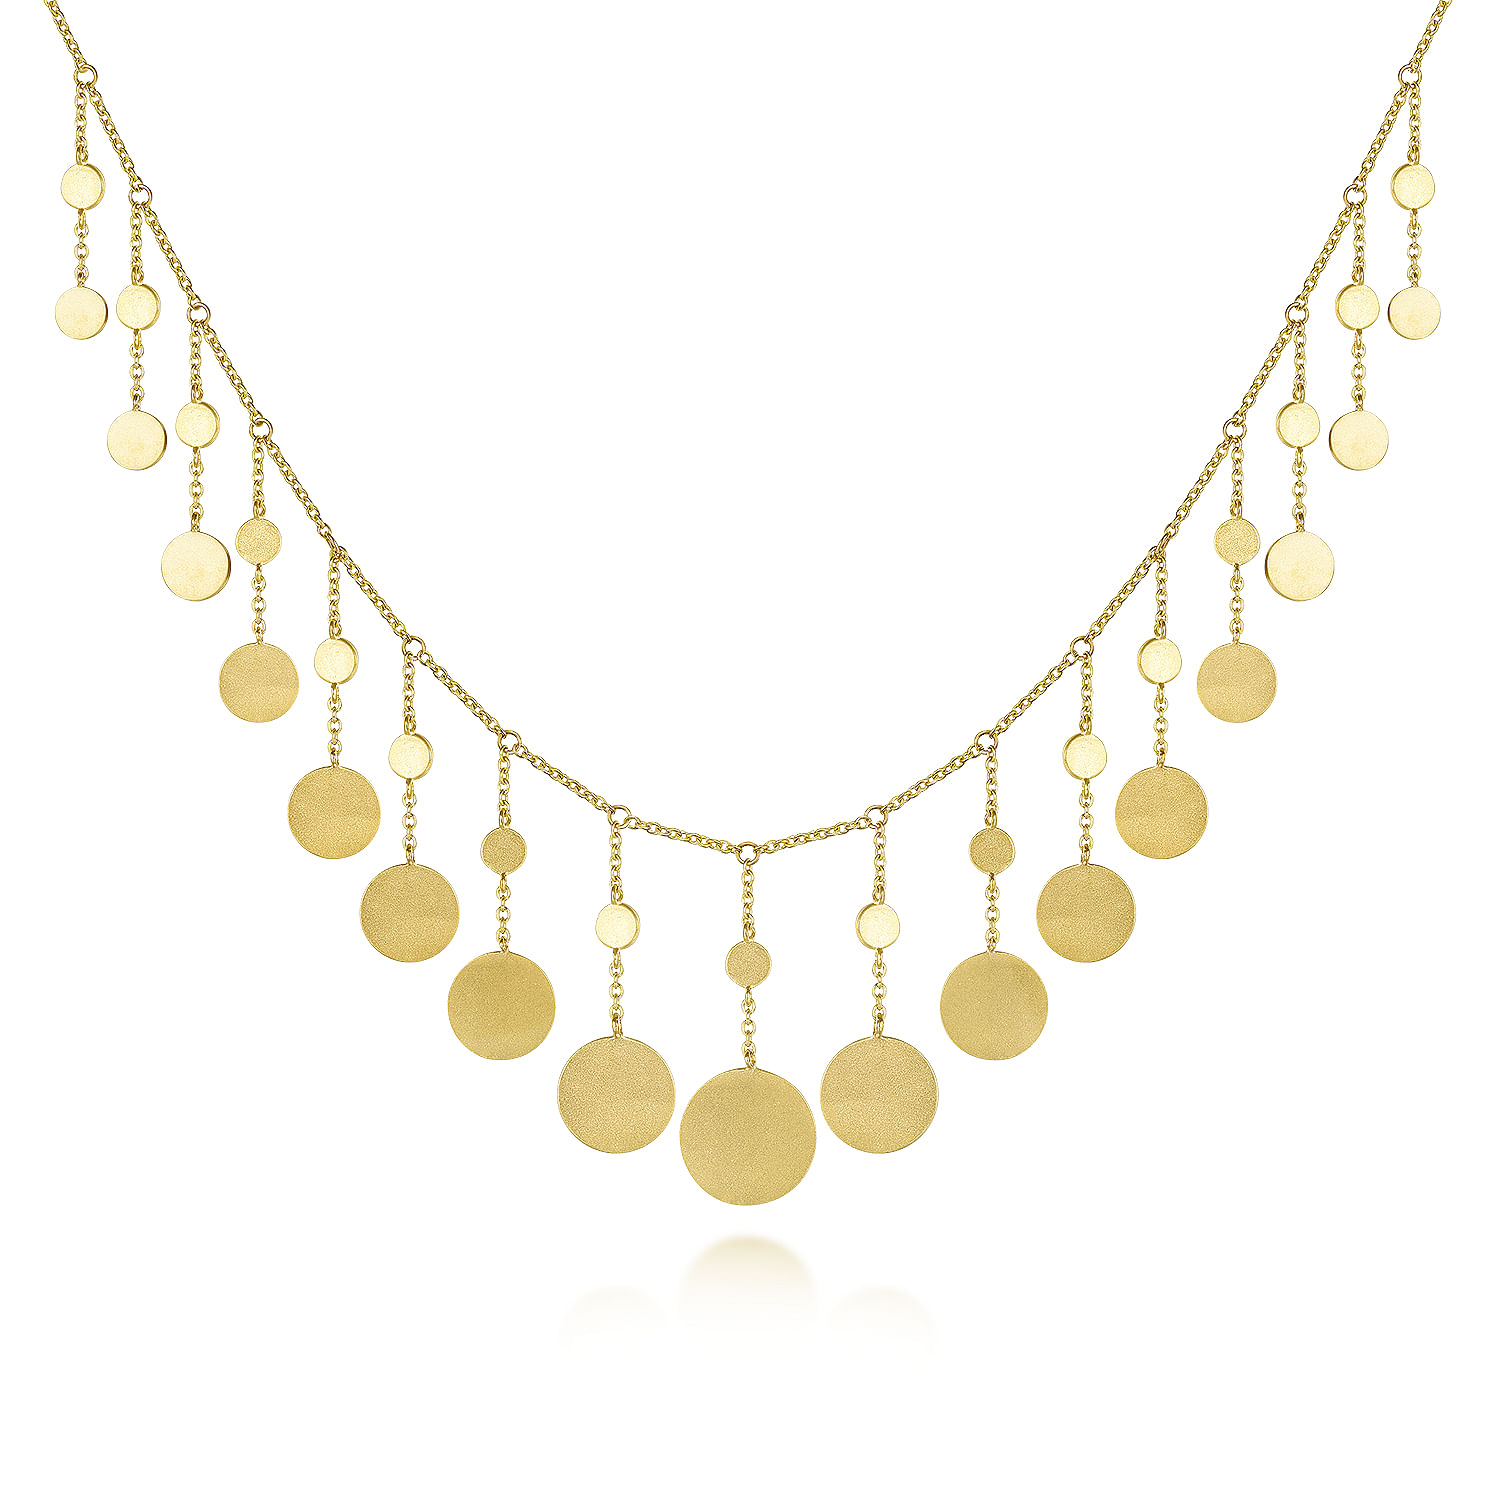 14K Yellow Gold Necklace with Round Shape Drops